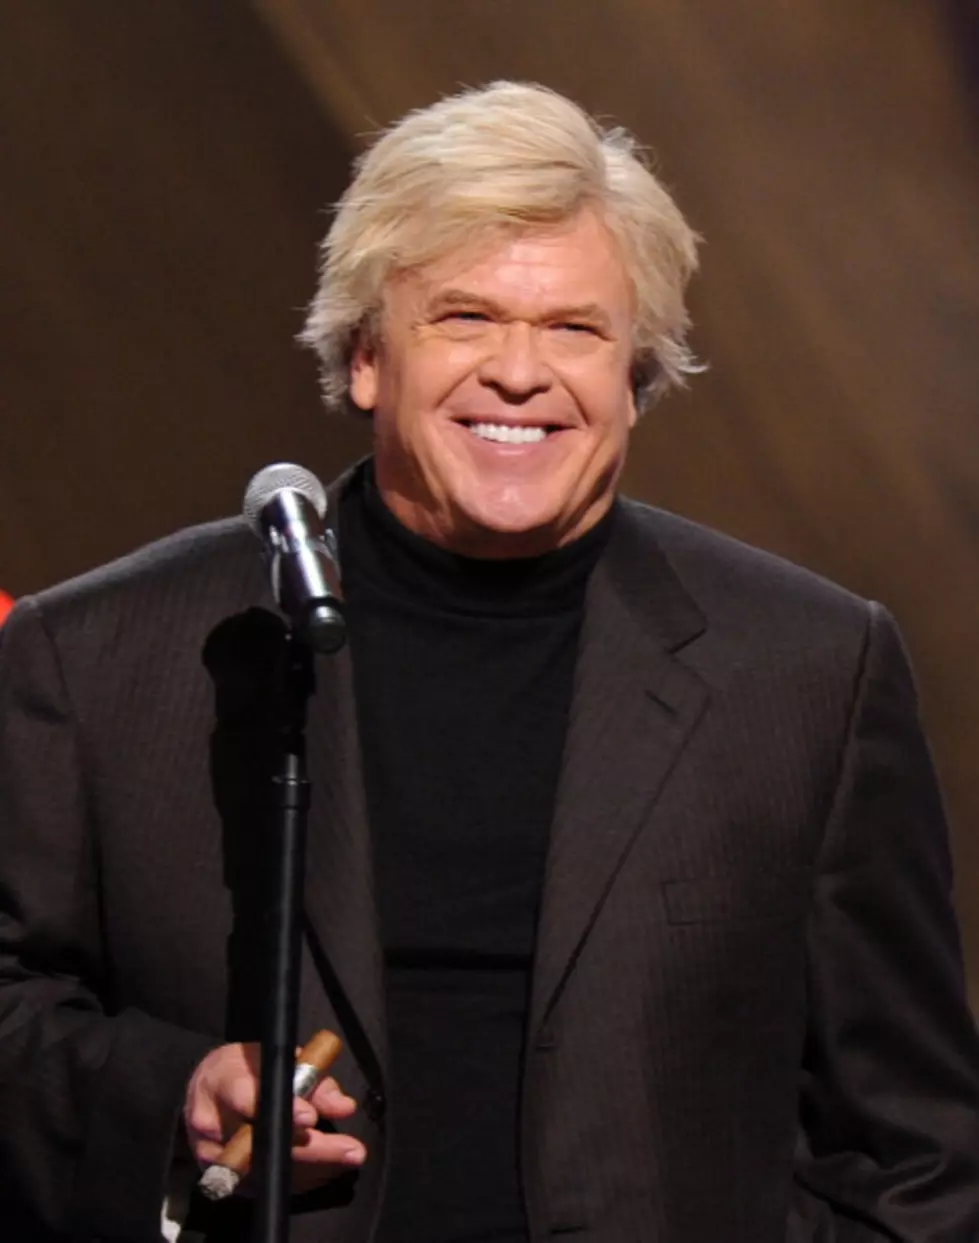 New Ron White DVD Coming Out October 11th [AUDIO]